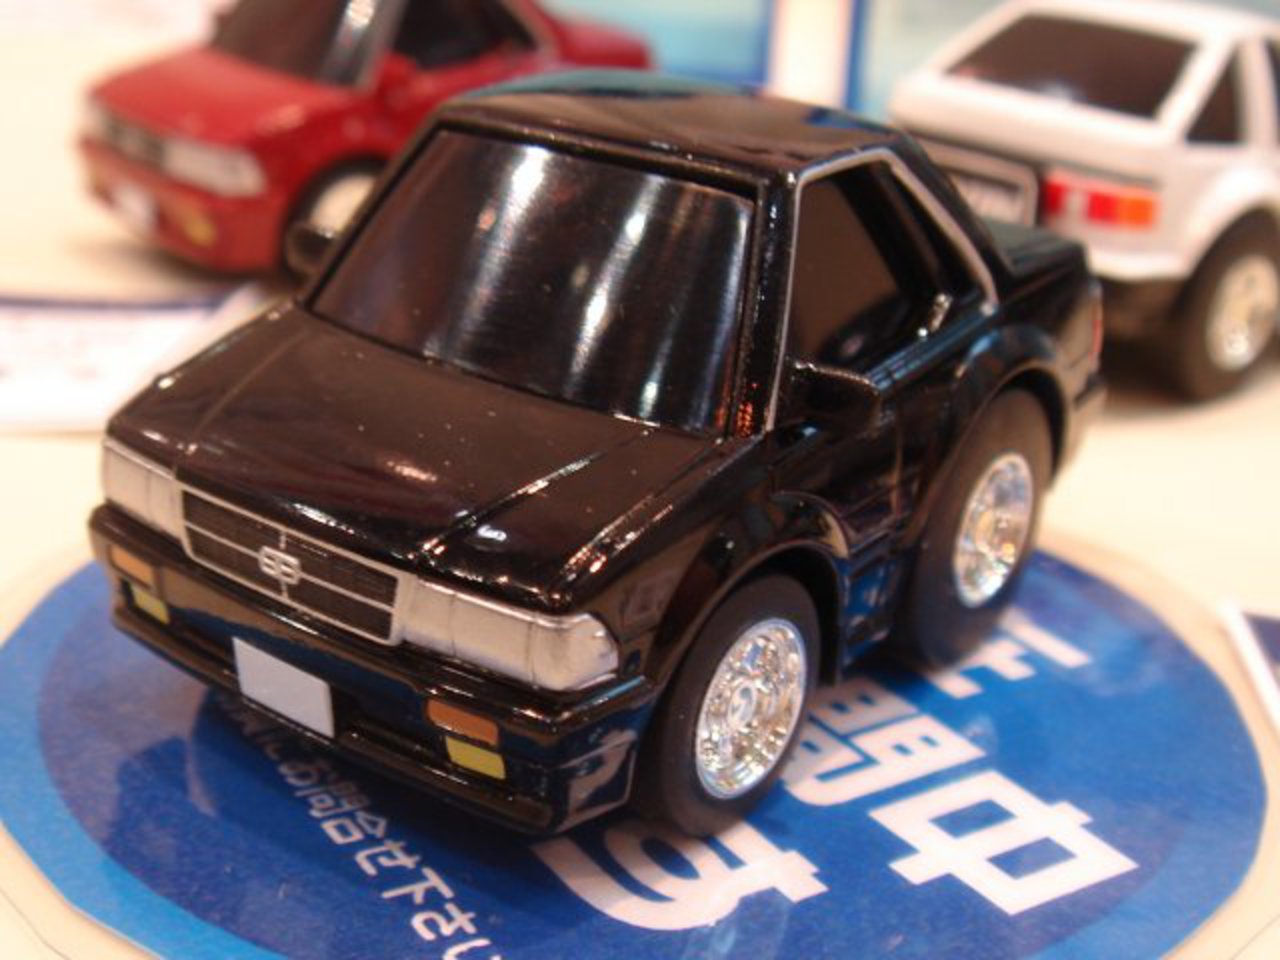 the Sprinter Trueno from the old lineup. Colors include white (of